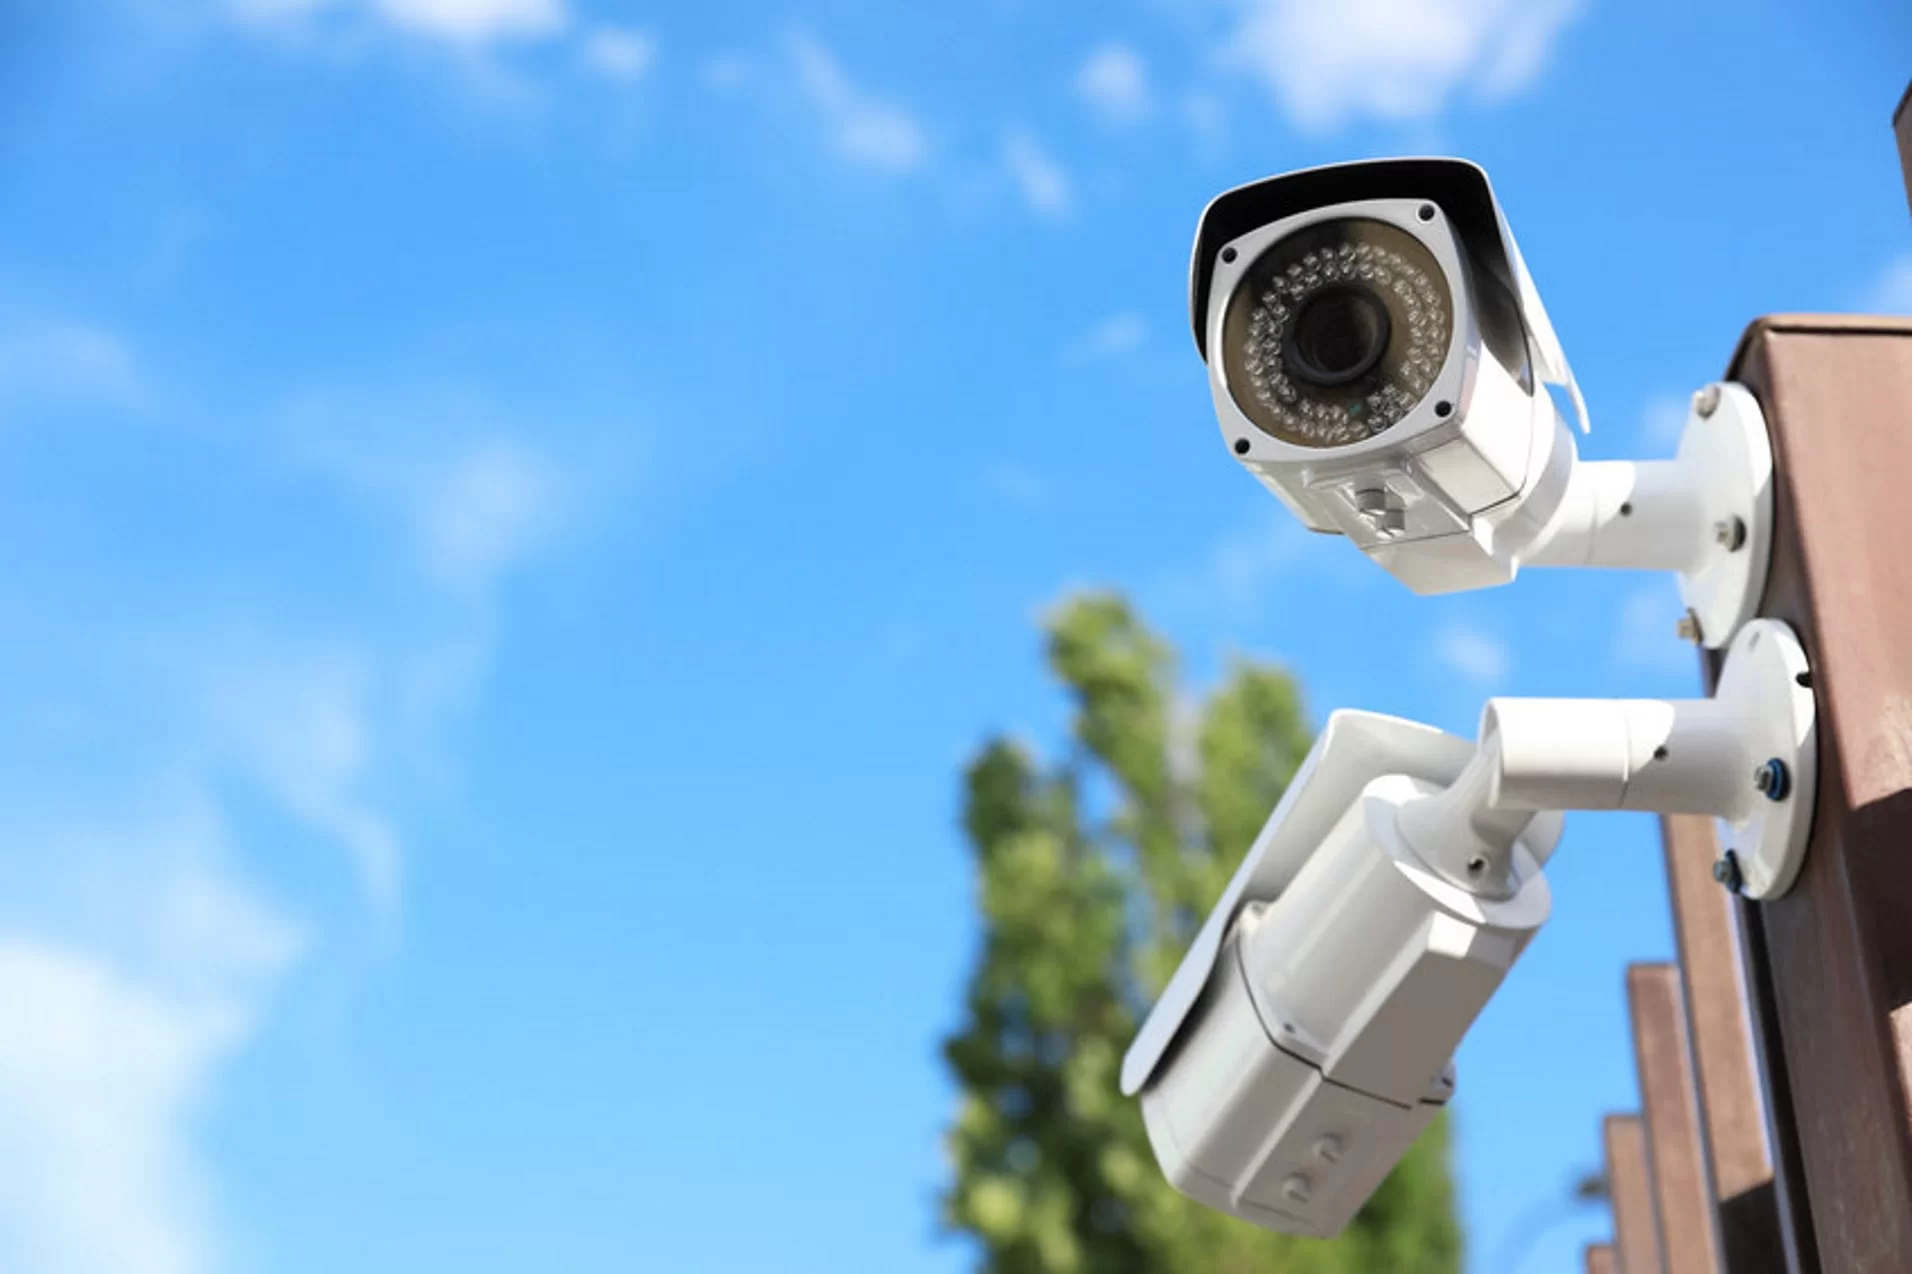 How To Get The Security Camera Footage